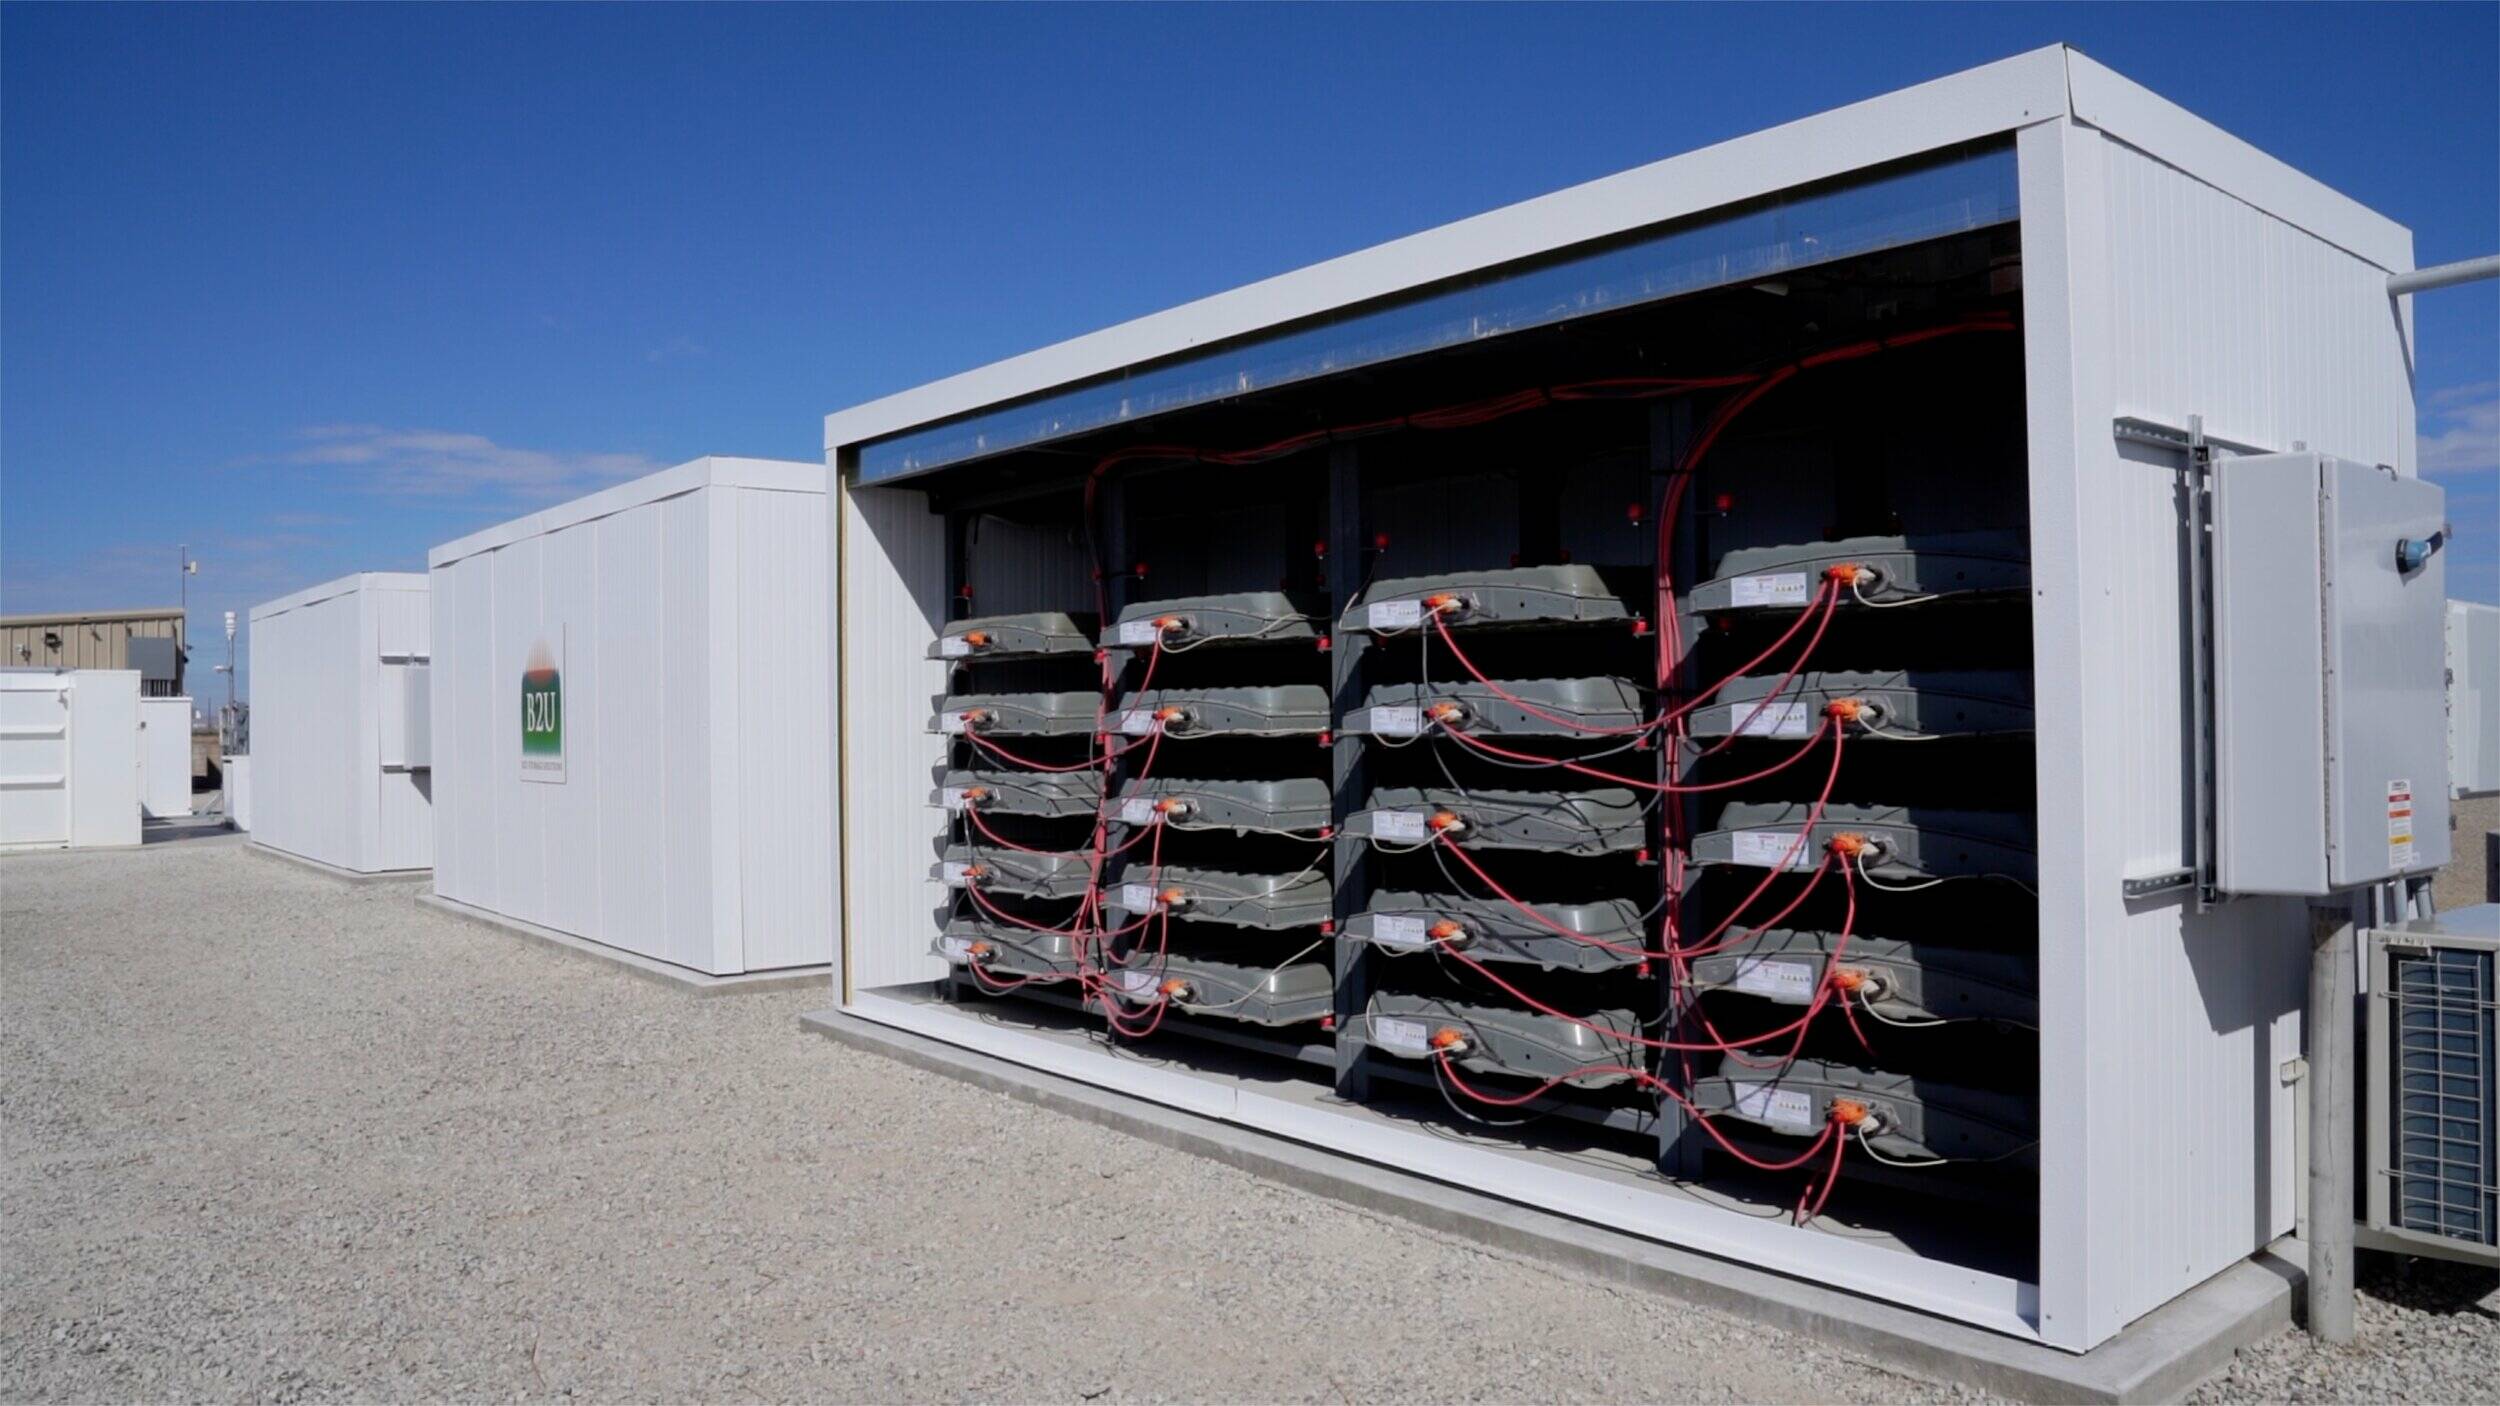 Used EV car batteries find new life storing solar power in California